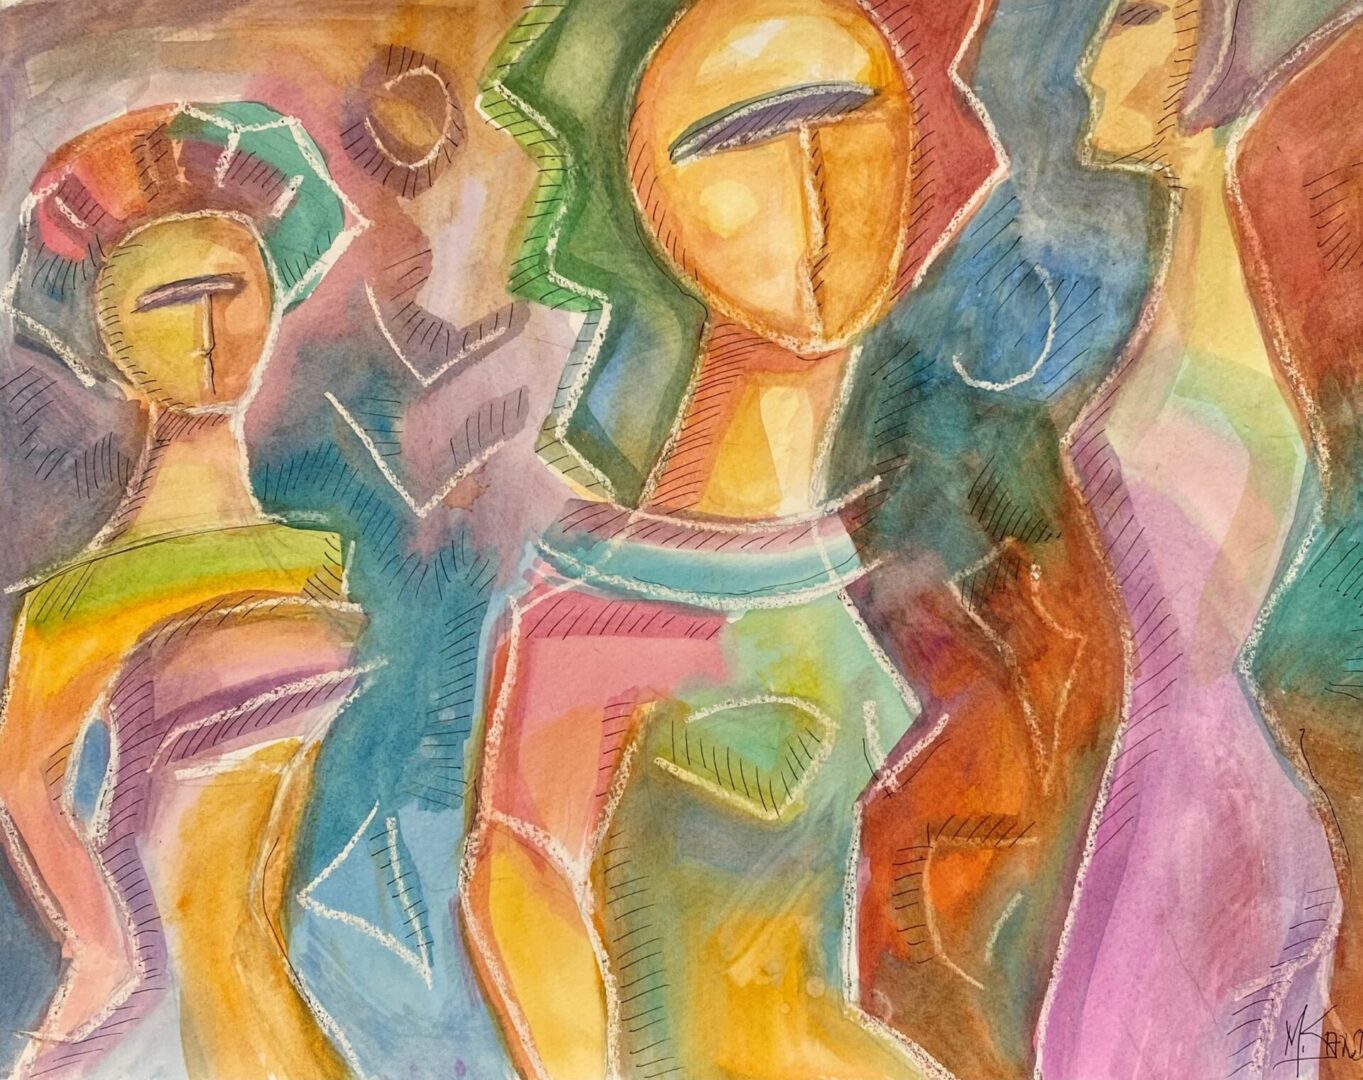 A painting of several people in different colors